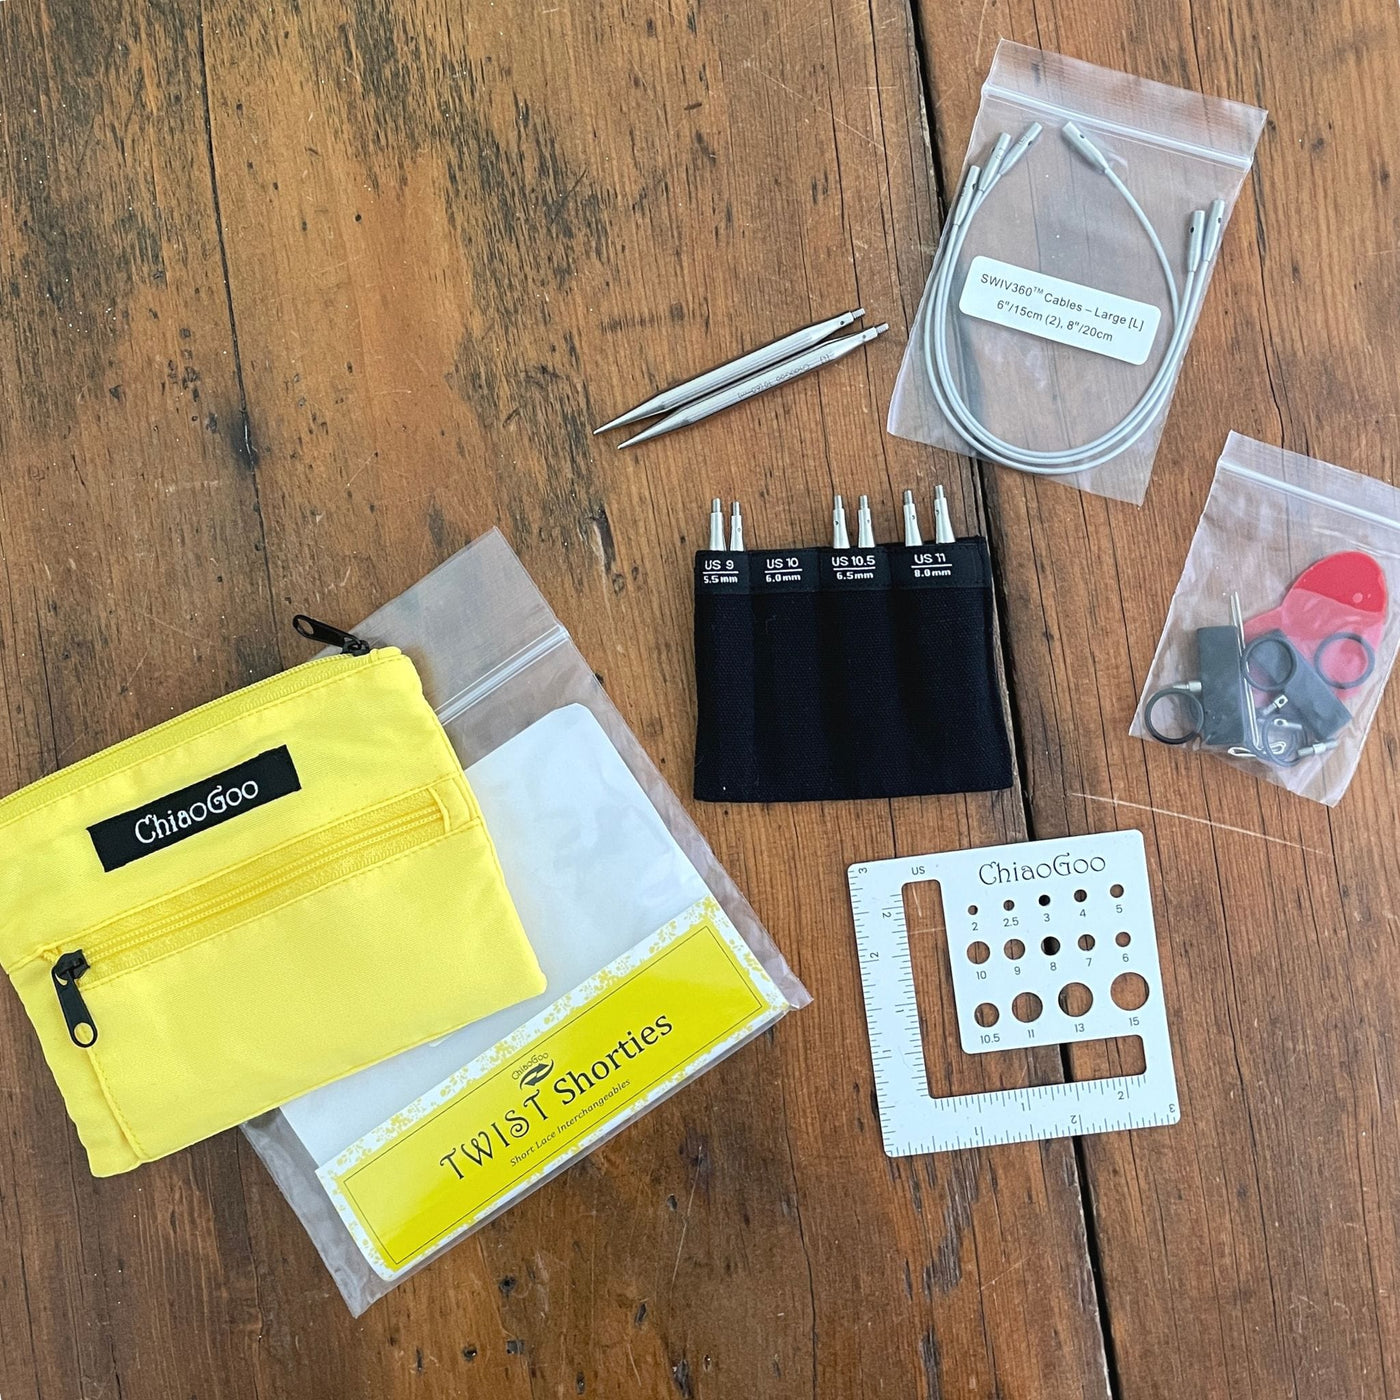 Chiaogoo 3" Twist Large Shortie set. Shown with all components on wood background with yellow pouch. Needle tips in US 9, 10, 10.5, 11, Connectors, 3 cables, end stoppers, tightening key, rubber gripper, stitch markers, and needle gauge.